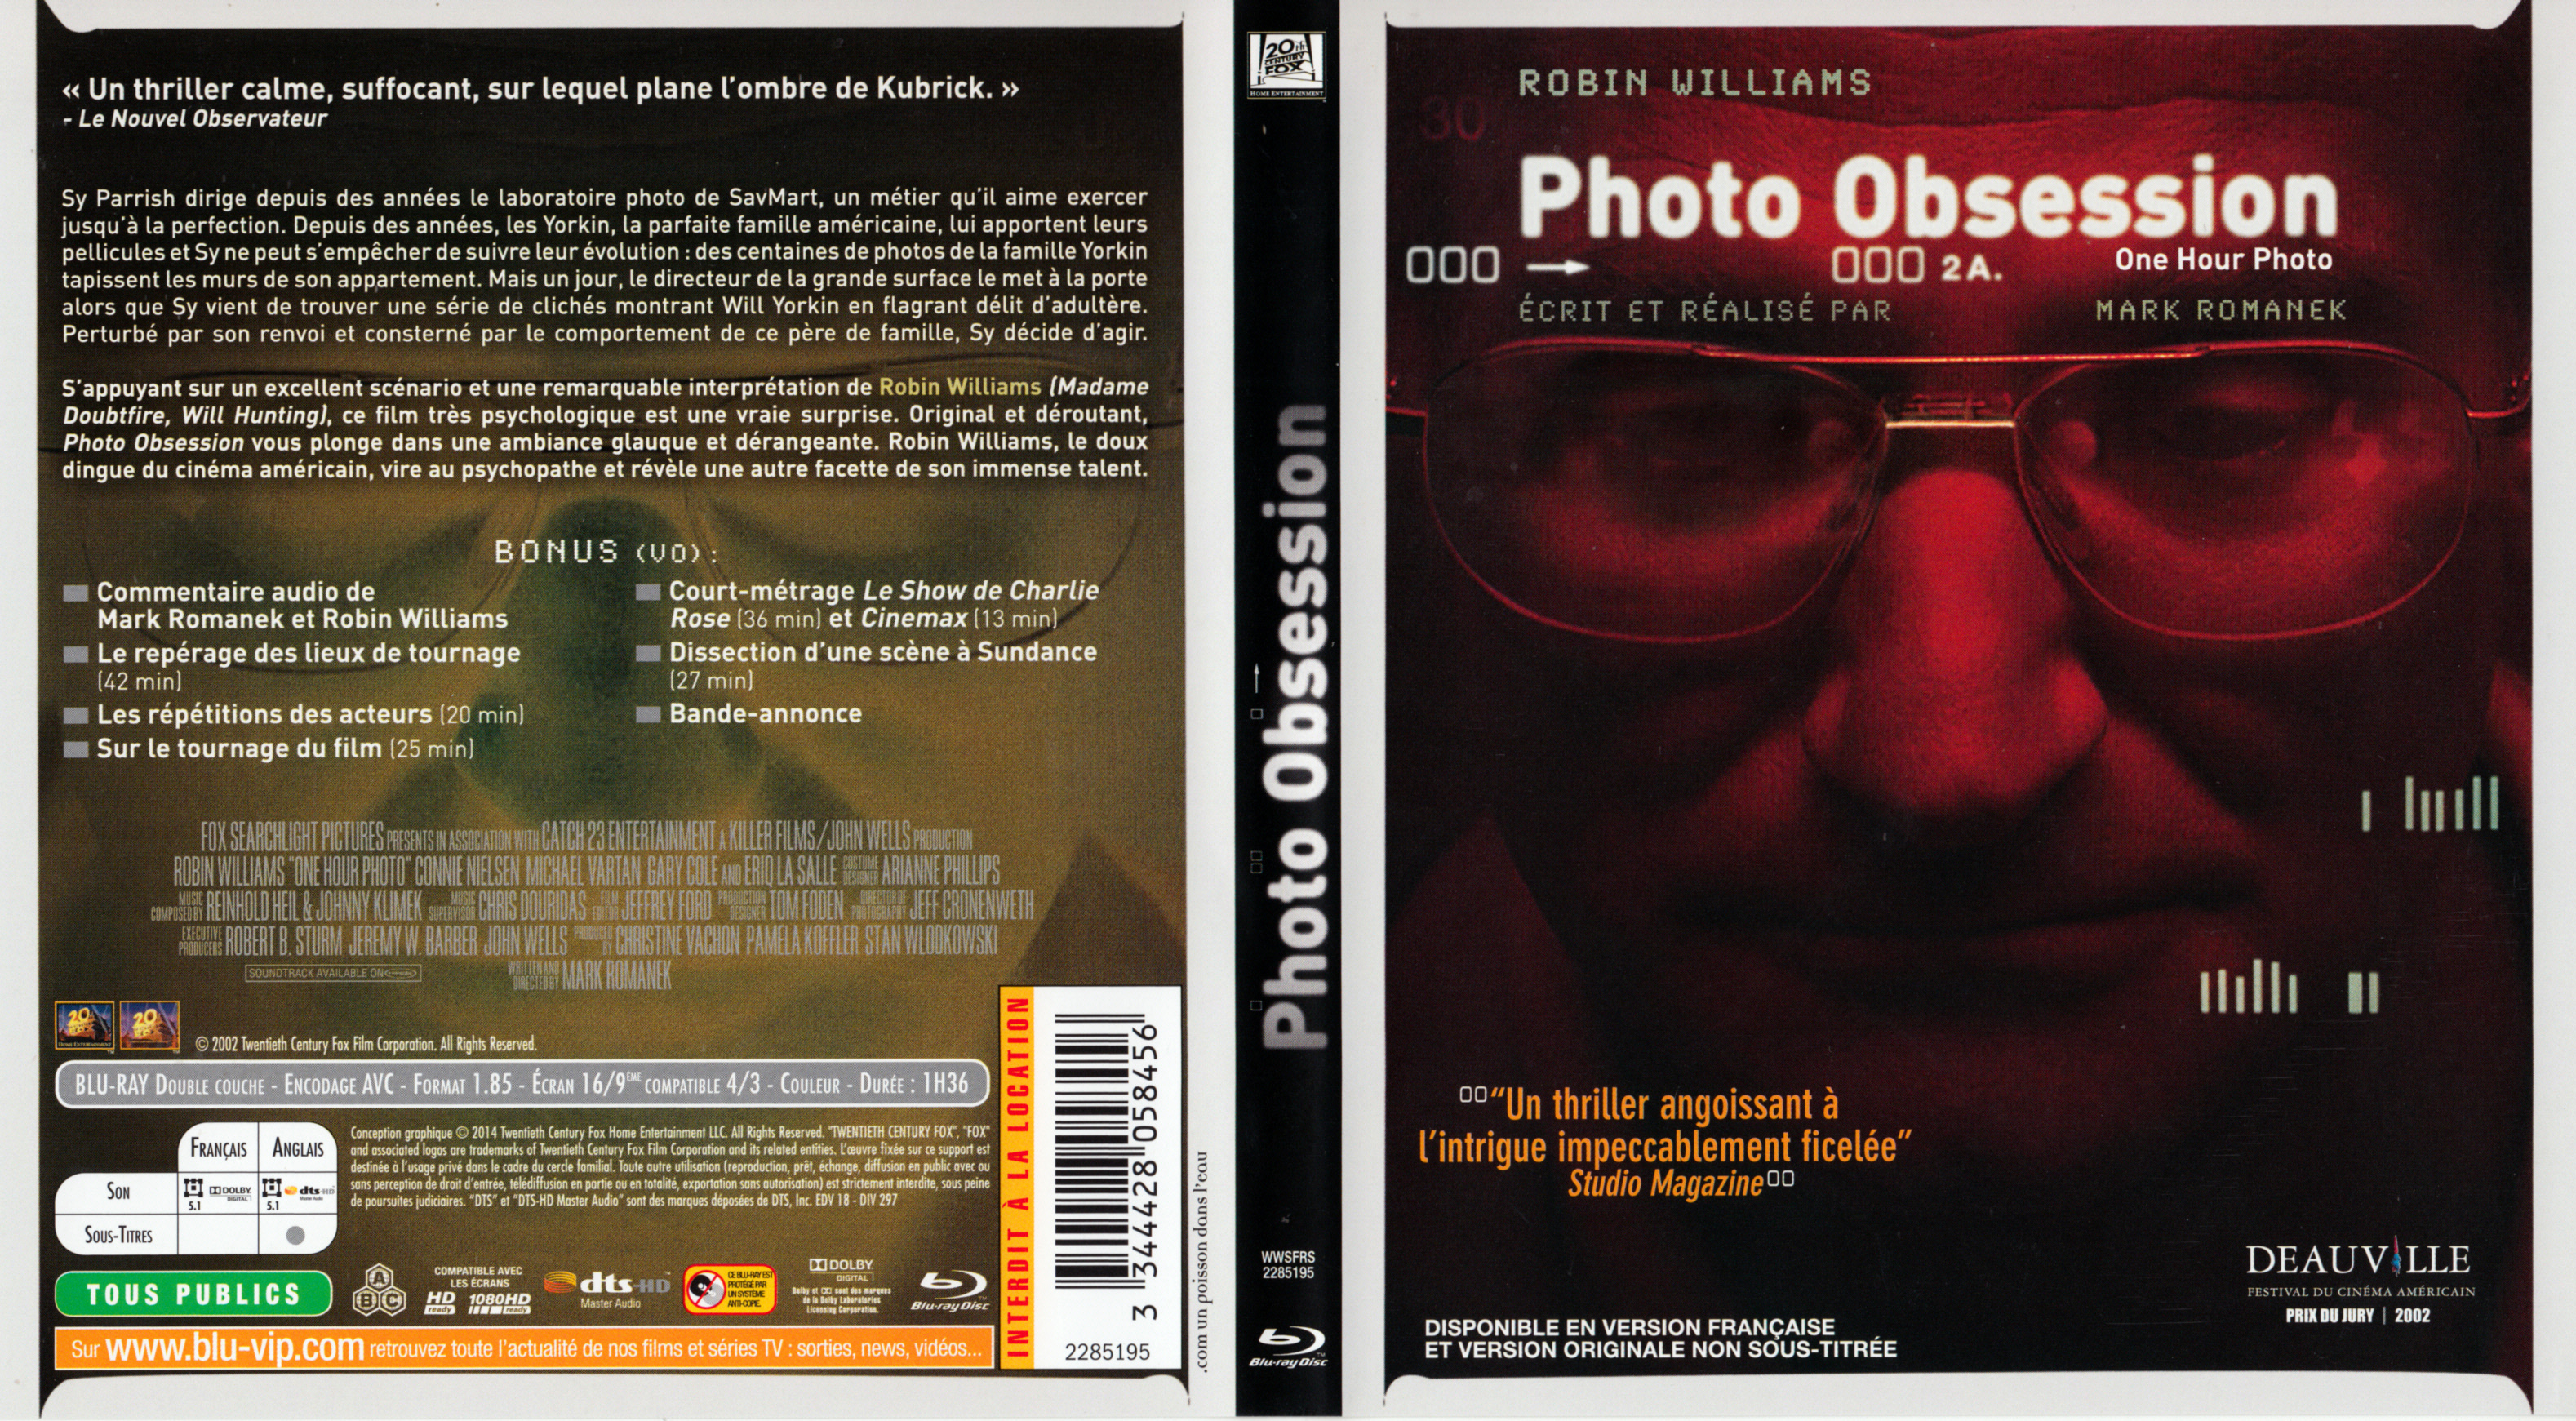 Jaquette DVD Photo obsession (BLU-RAY)